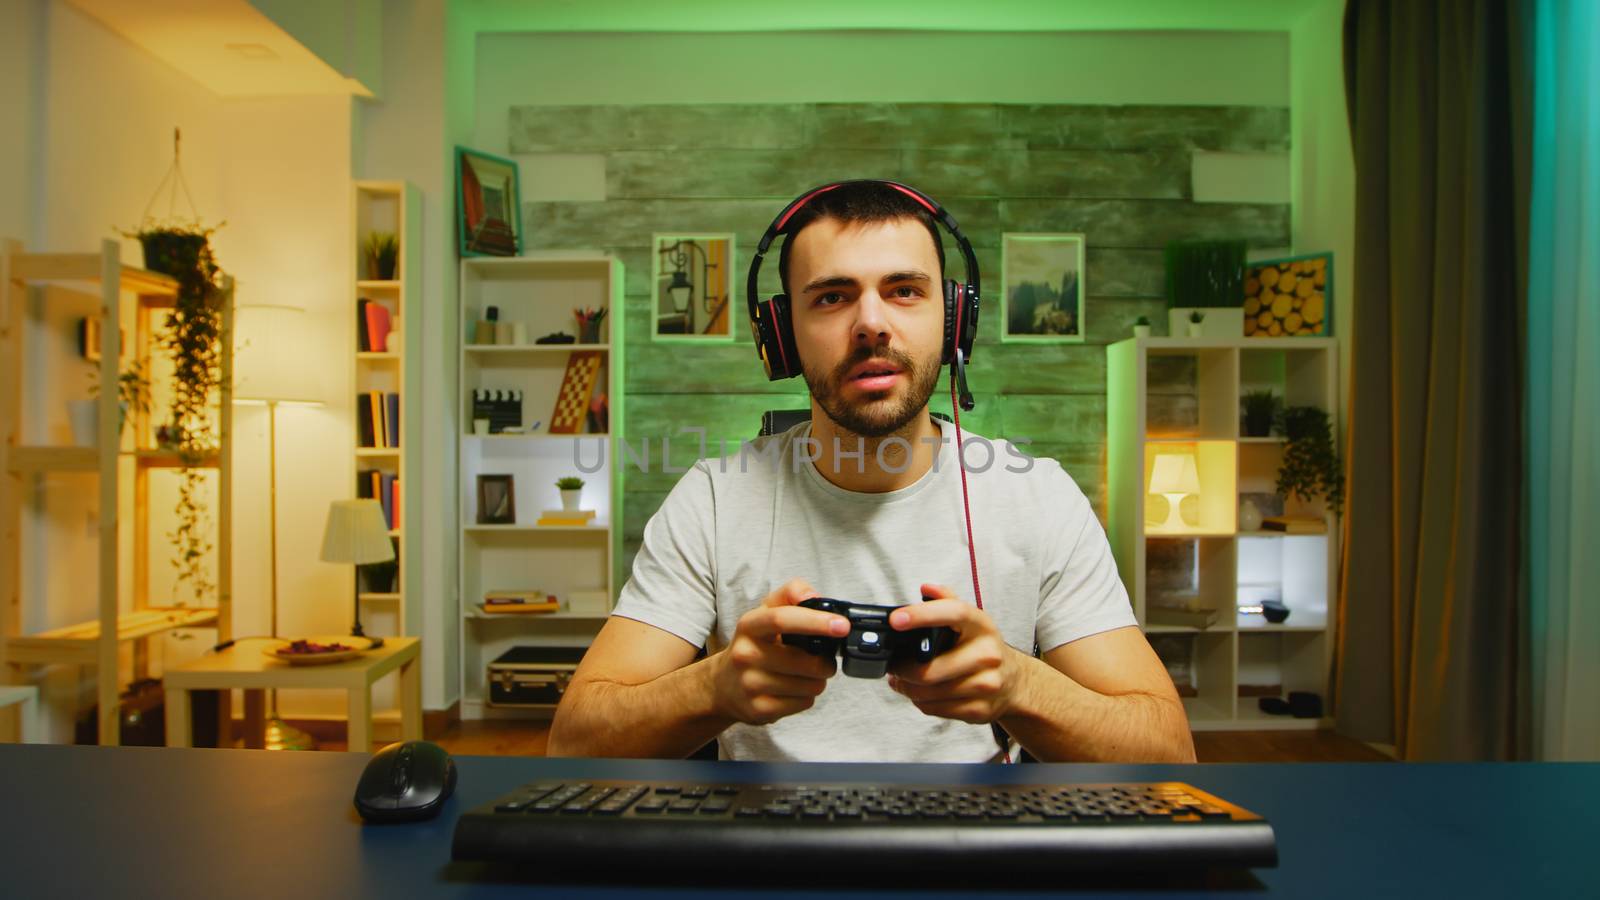 Pov of young man with headphones in in a room with neon light playing games with wireless controller.